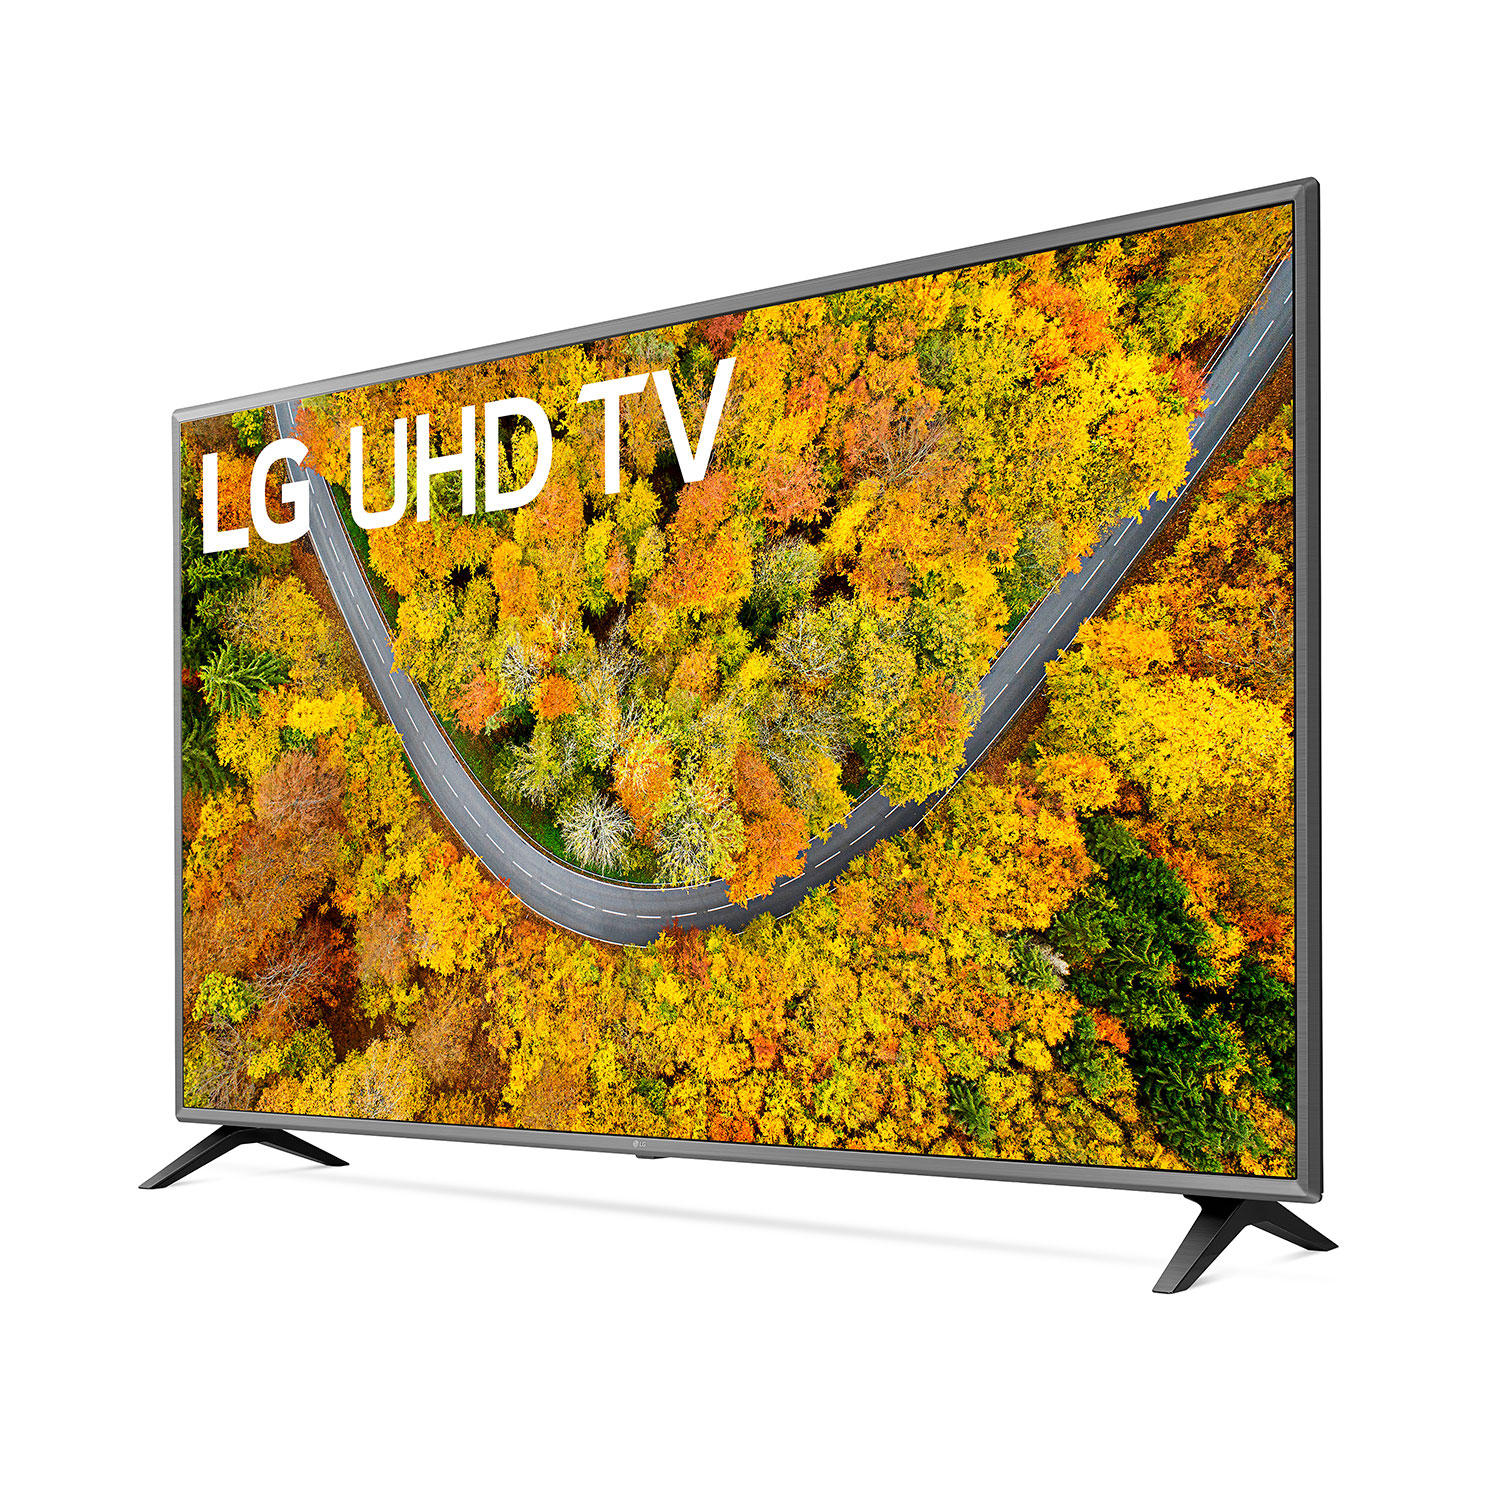 LG 75UP7570AUD 75″ 4K Ultra HD Smart TV with ThinQ AI